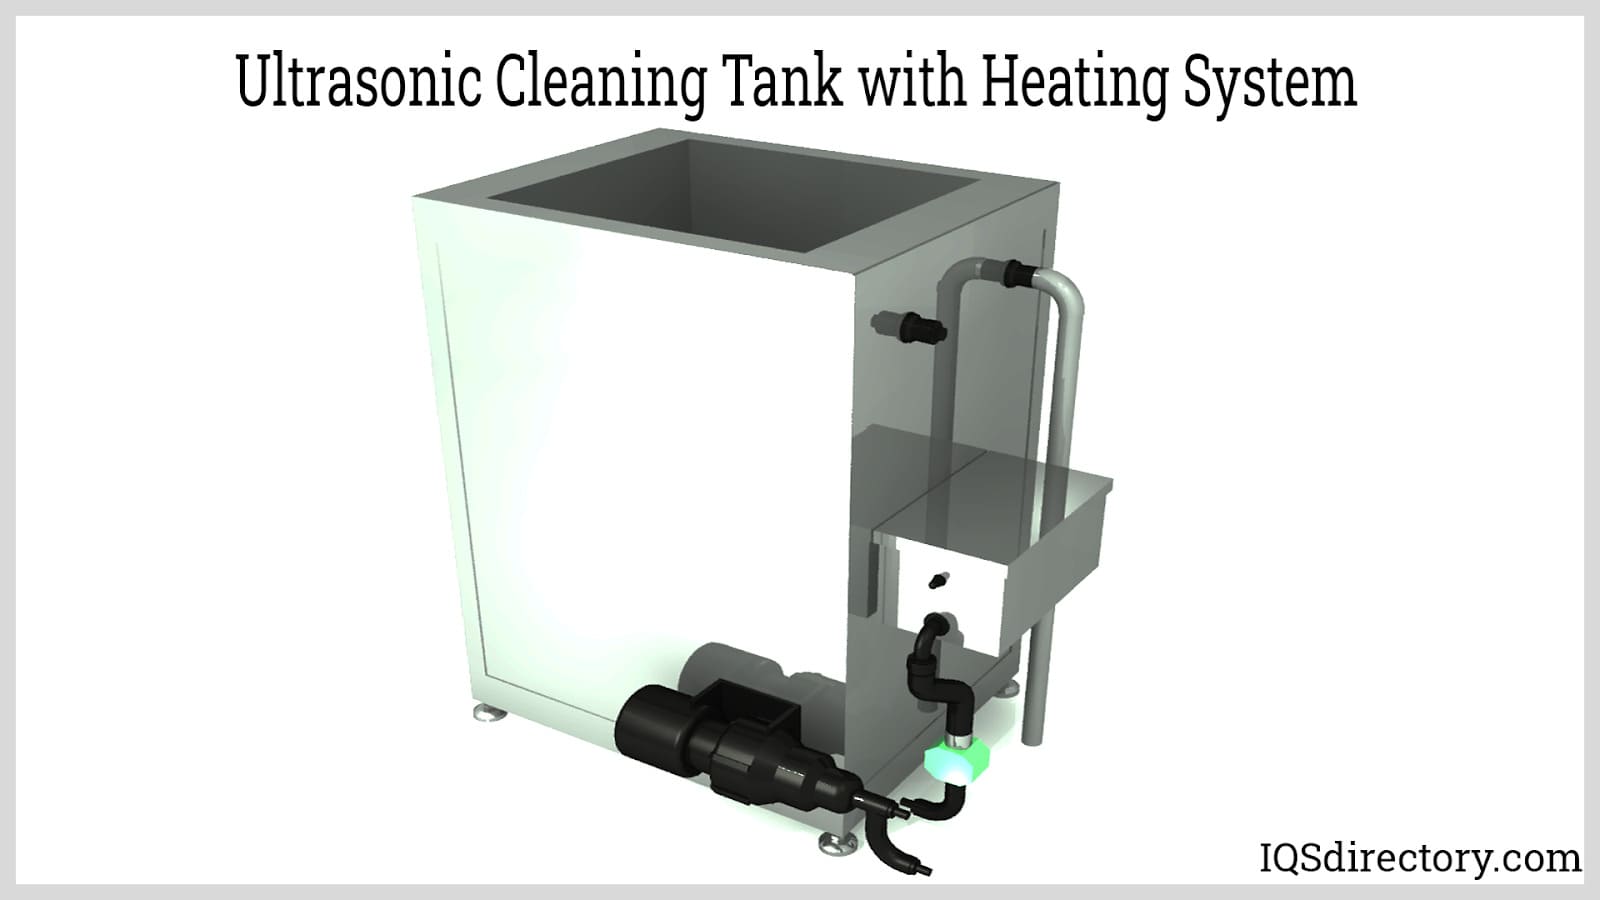 Ultrasonic Cleaning Tank with Heating System